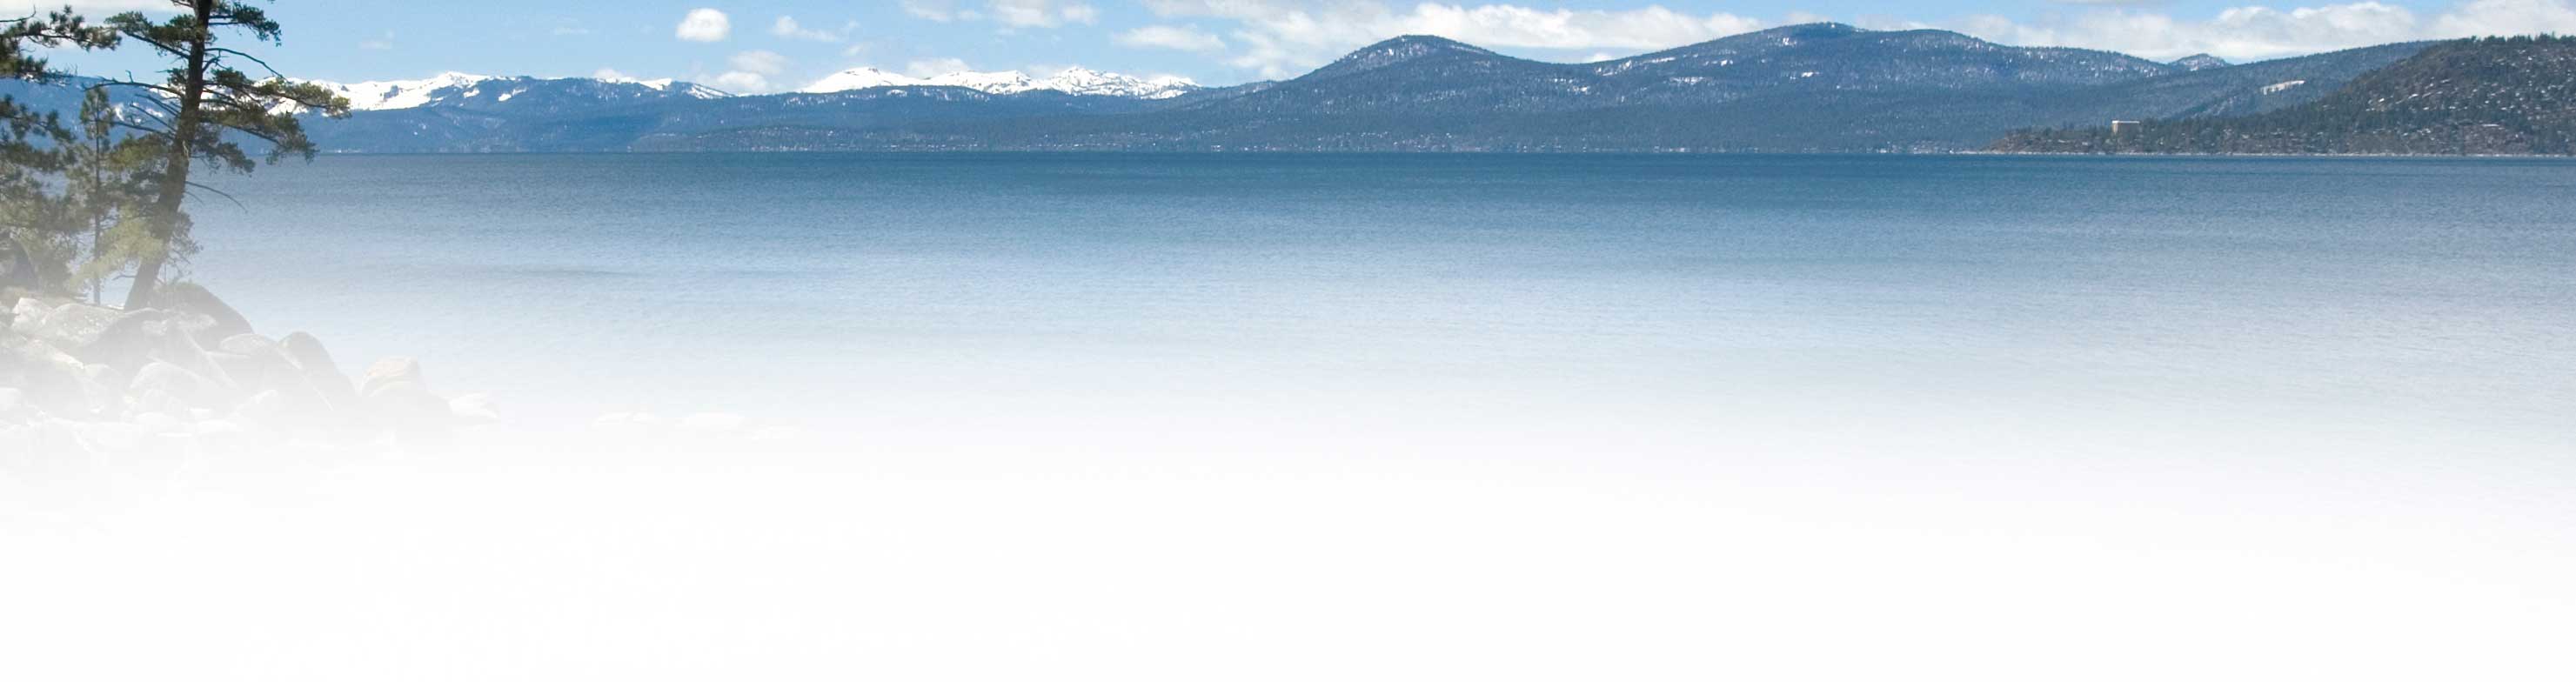 Lake Tahoe image for providers